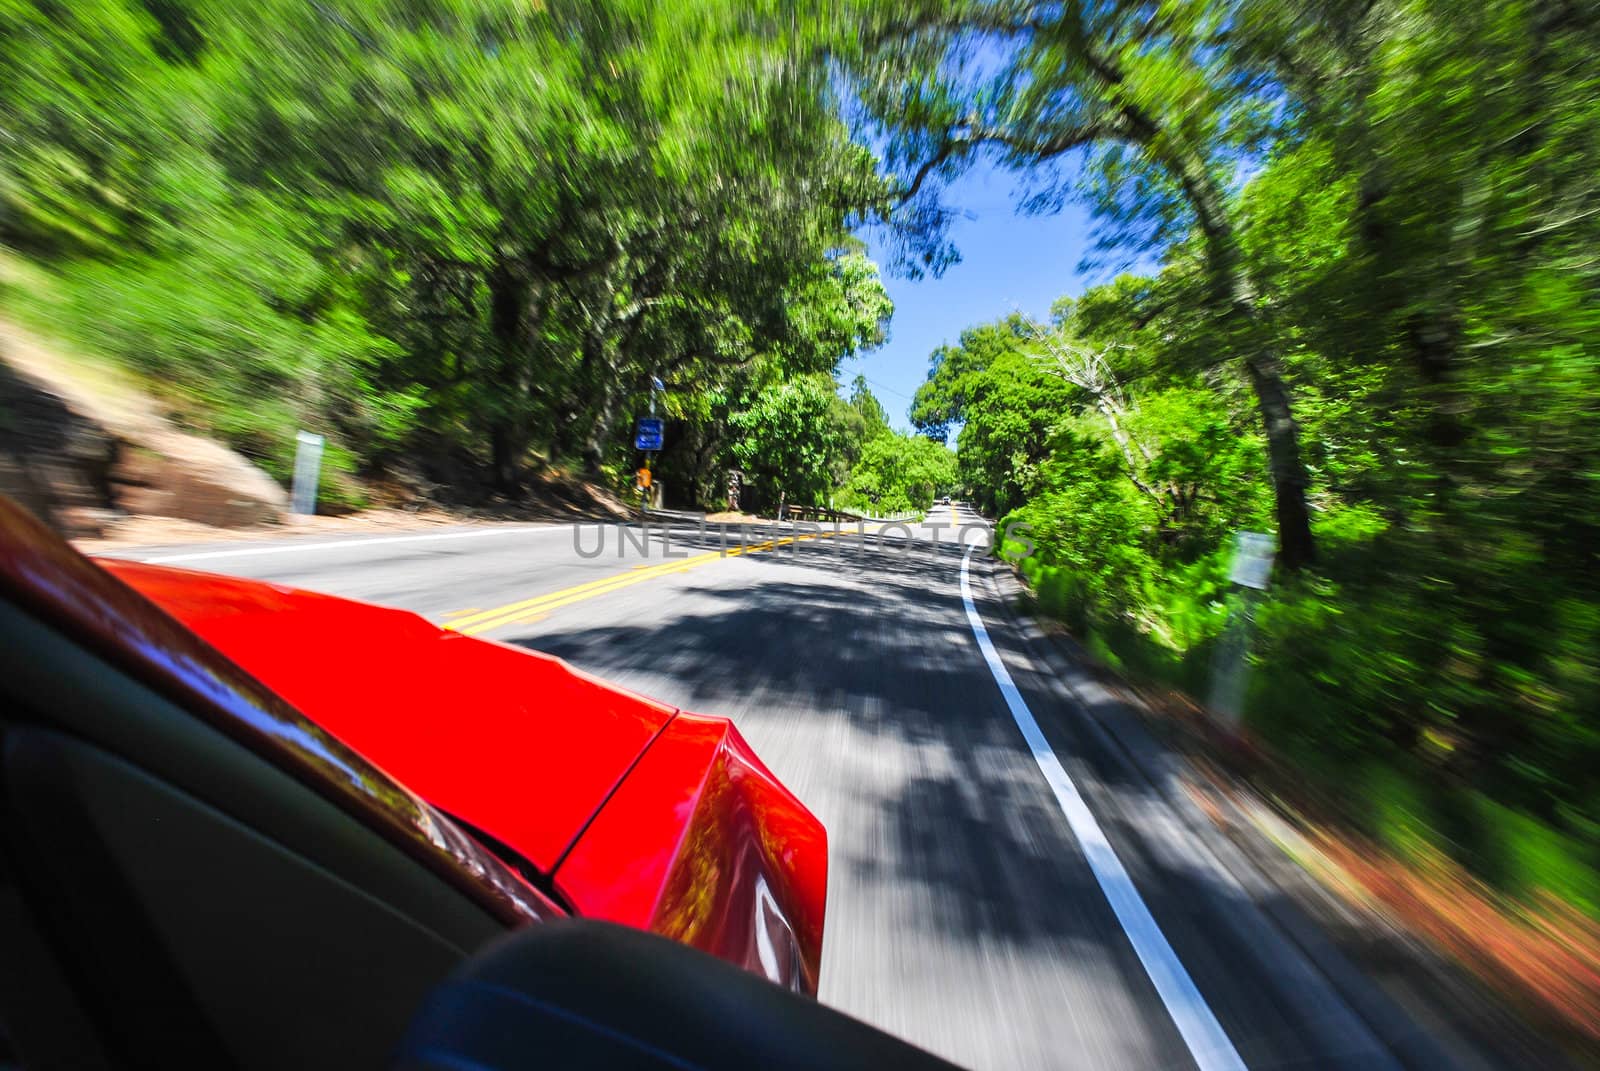 Photograph of a red sports car flying down a back country road with trees and road blurred.